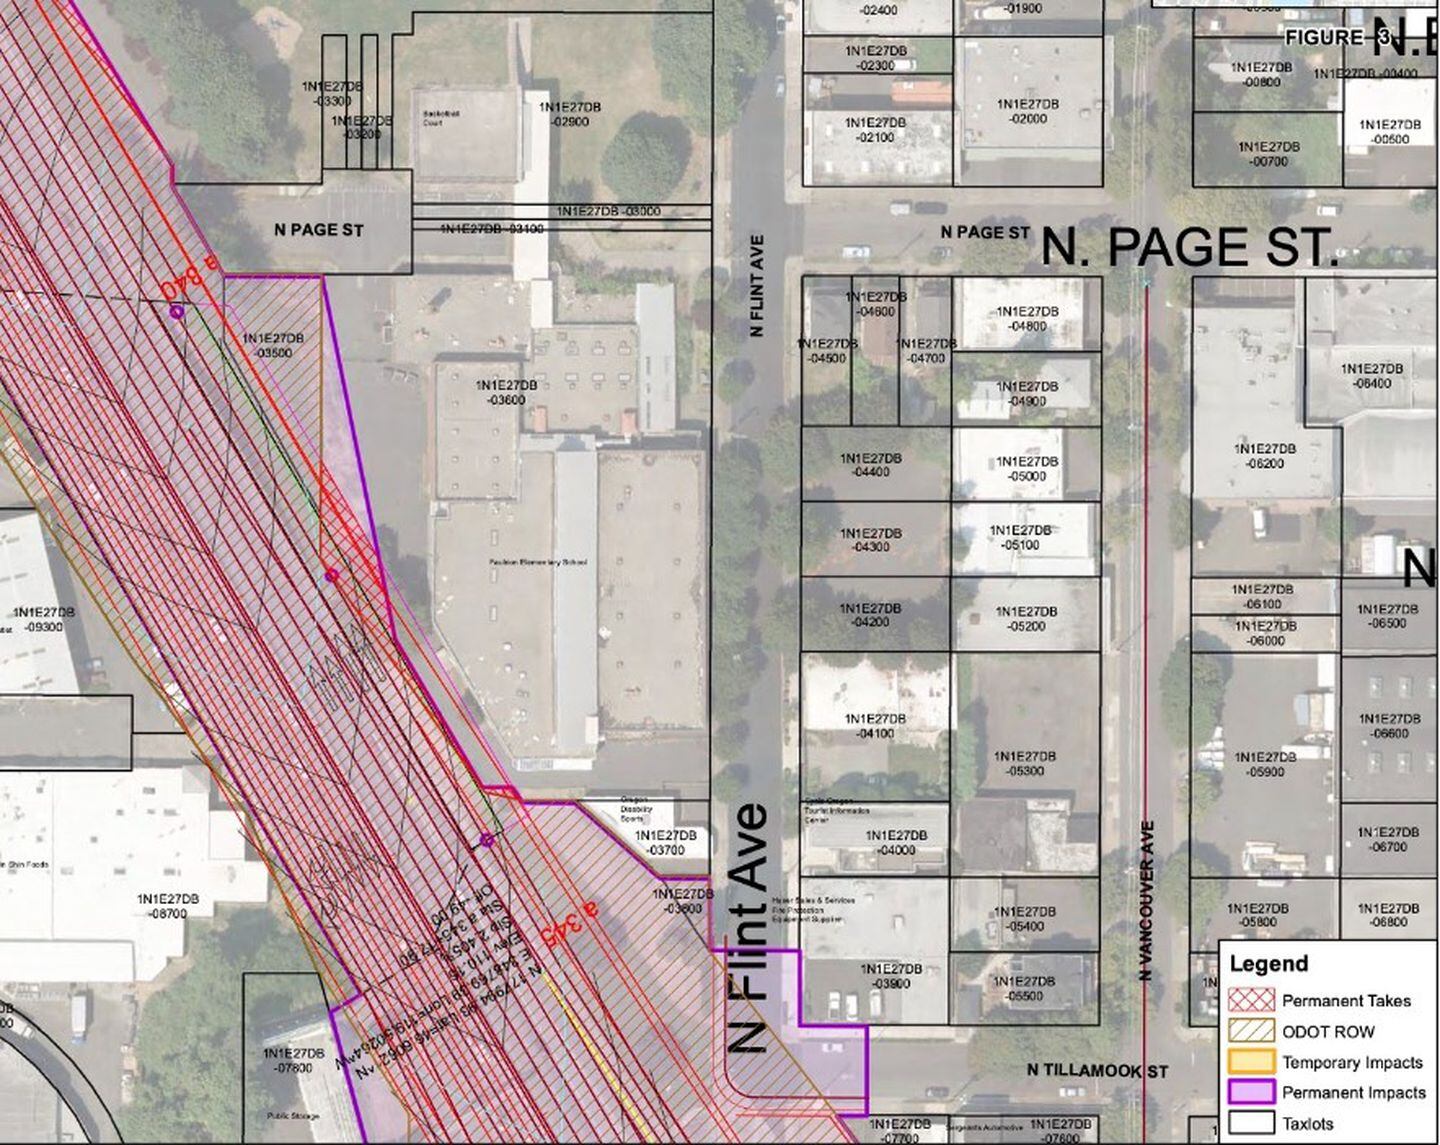 Odot Plans To Take Part Of School Grounds For I 5 Widening Project Opb